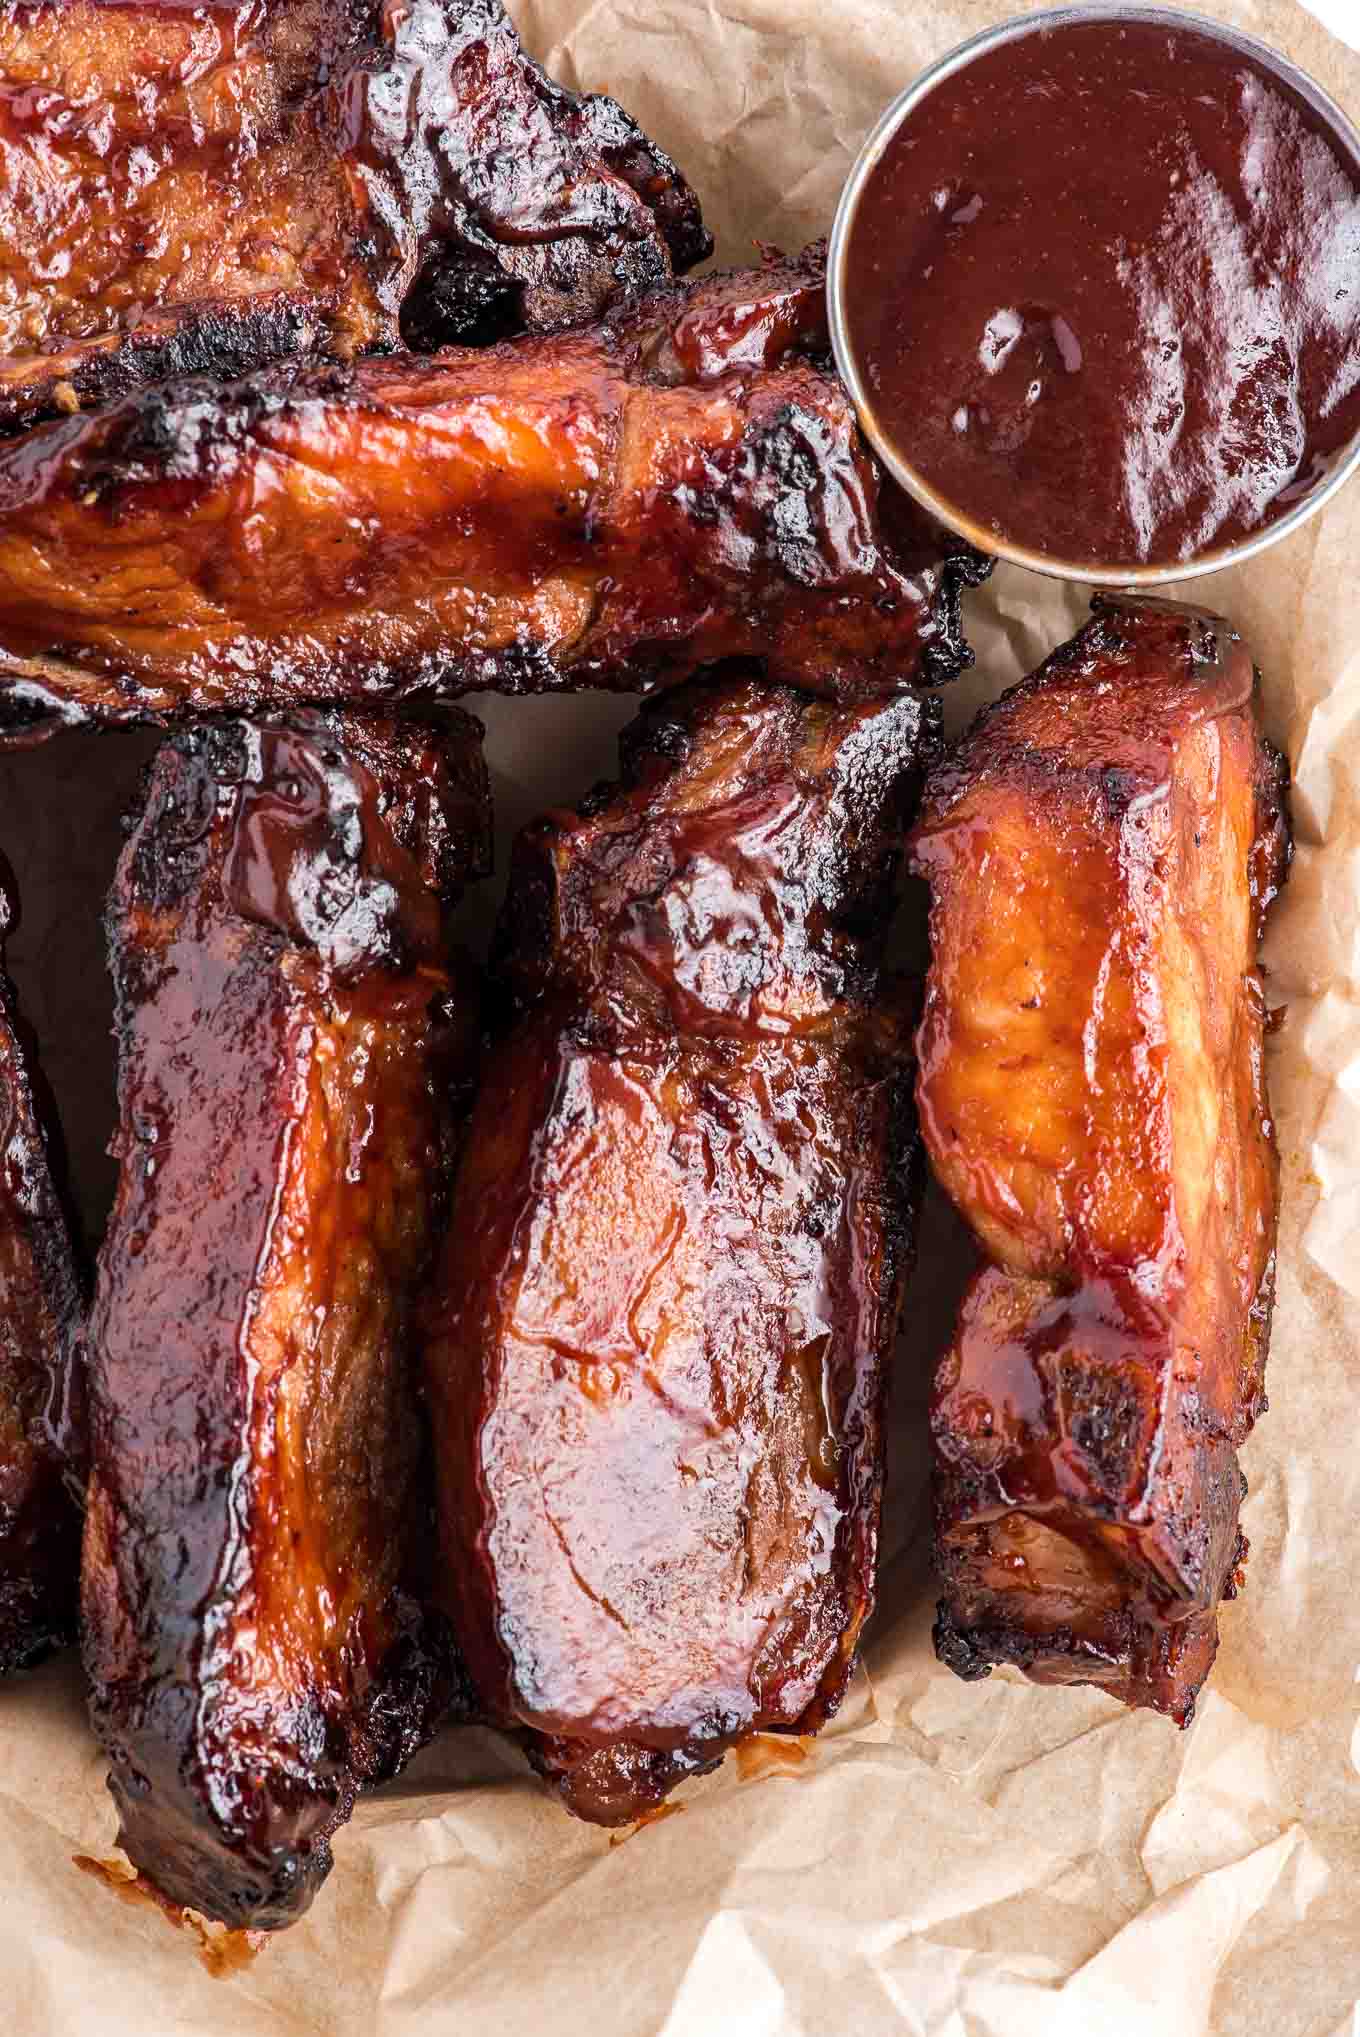 Air fryer country style ribs on brown parchment paper with a ramekin of BBQ sauce to the side.